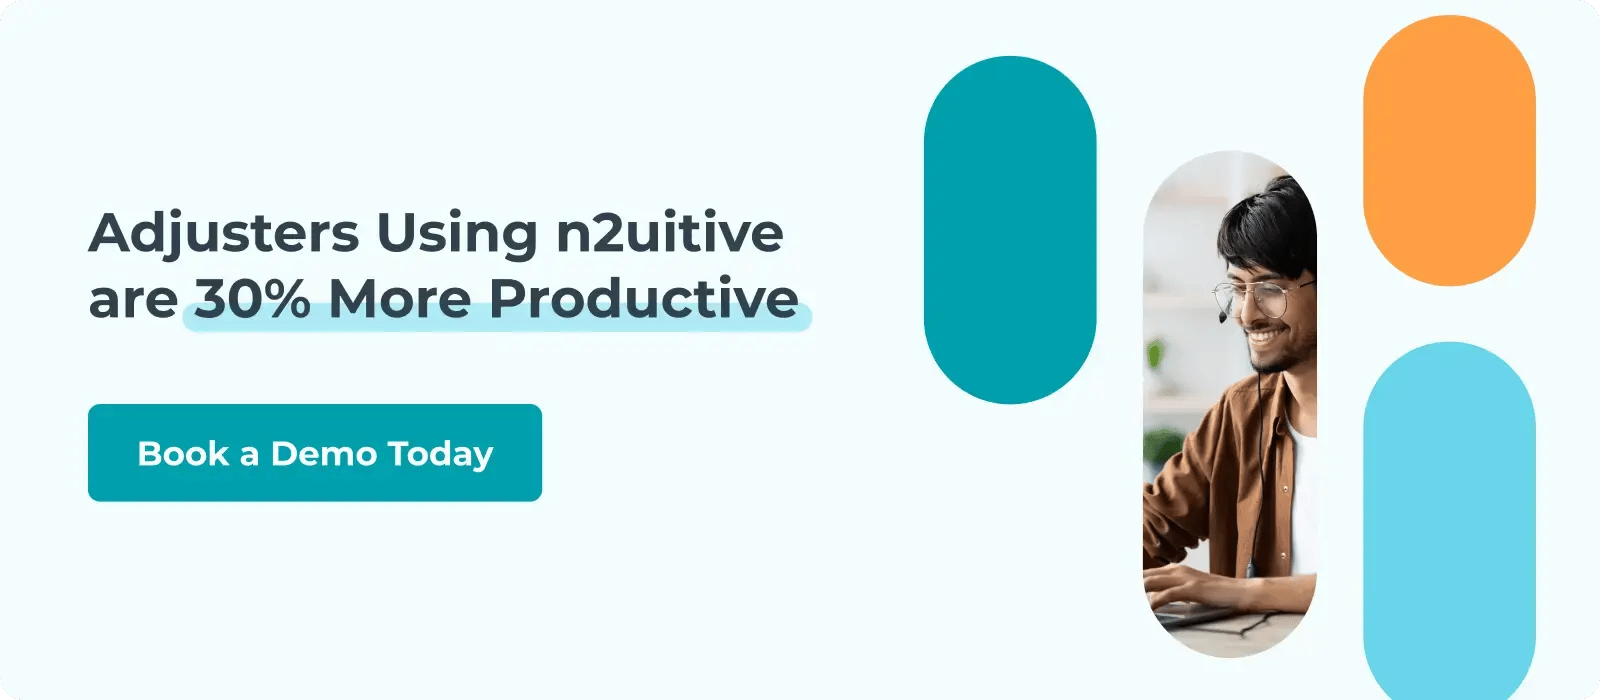 adjusters are 30% more productive with n2uitive. Click to book a demo